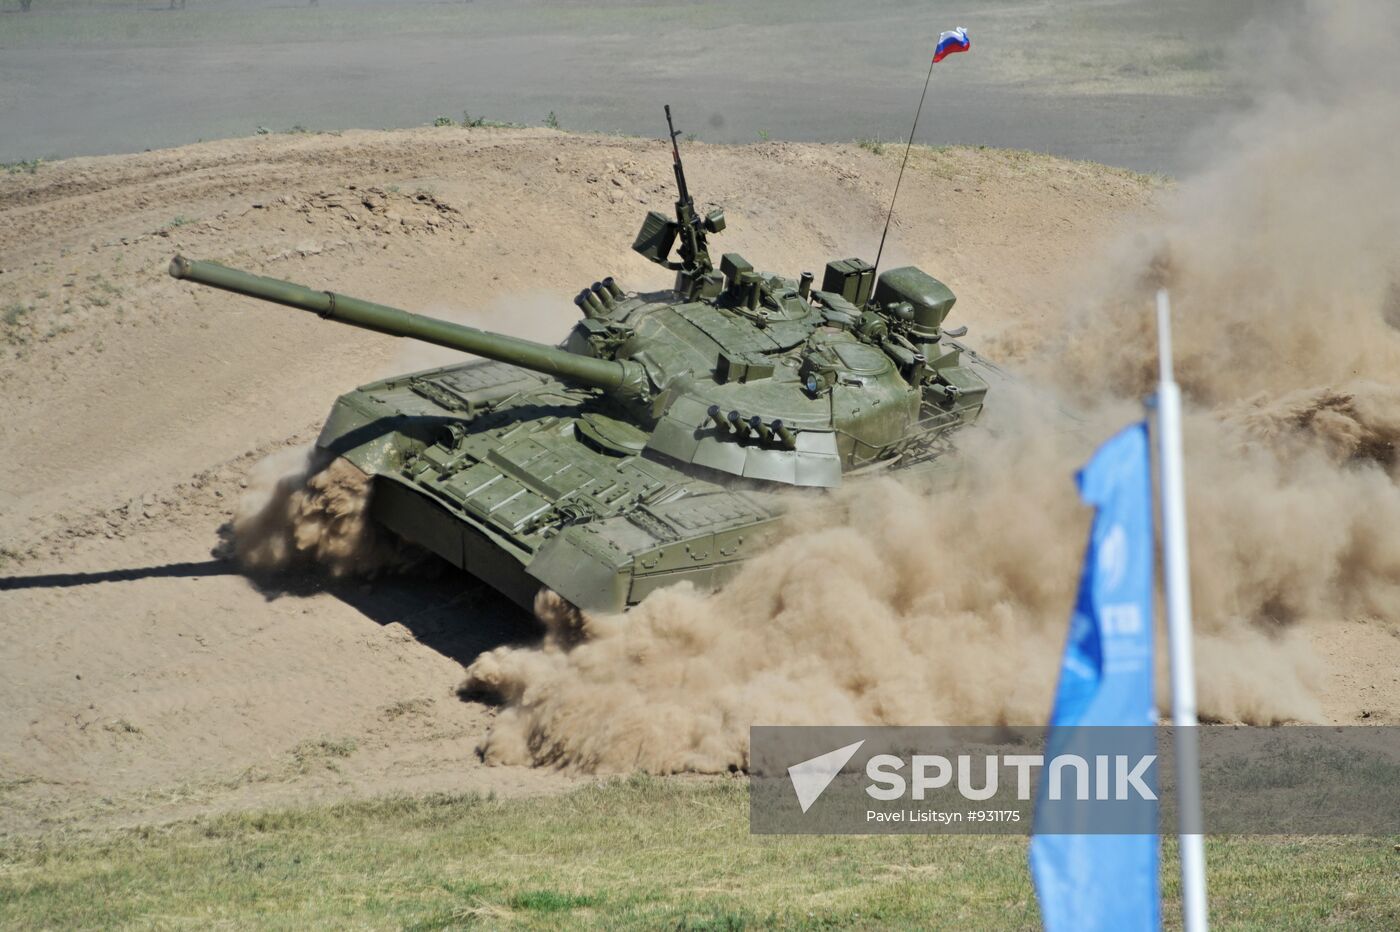 Demonstration of equipment and weapons in "VTTV-Omsk-2011"